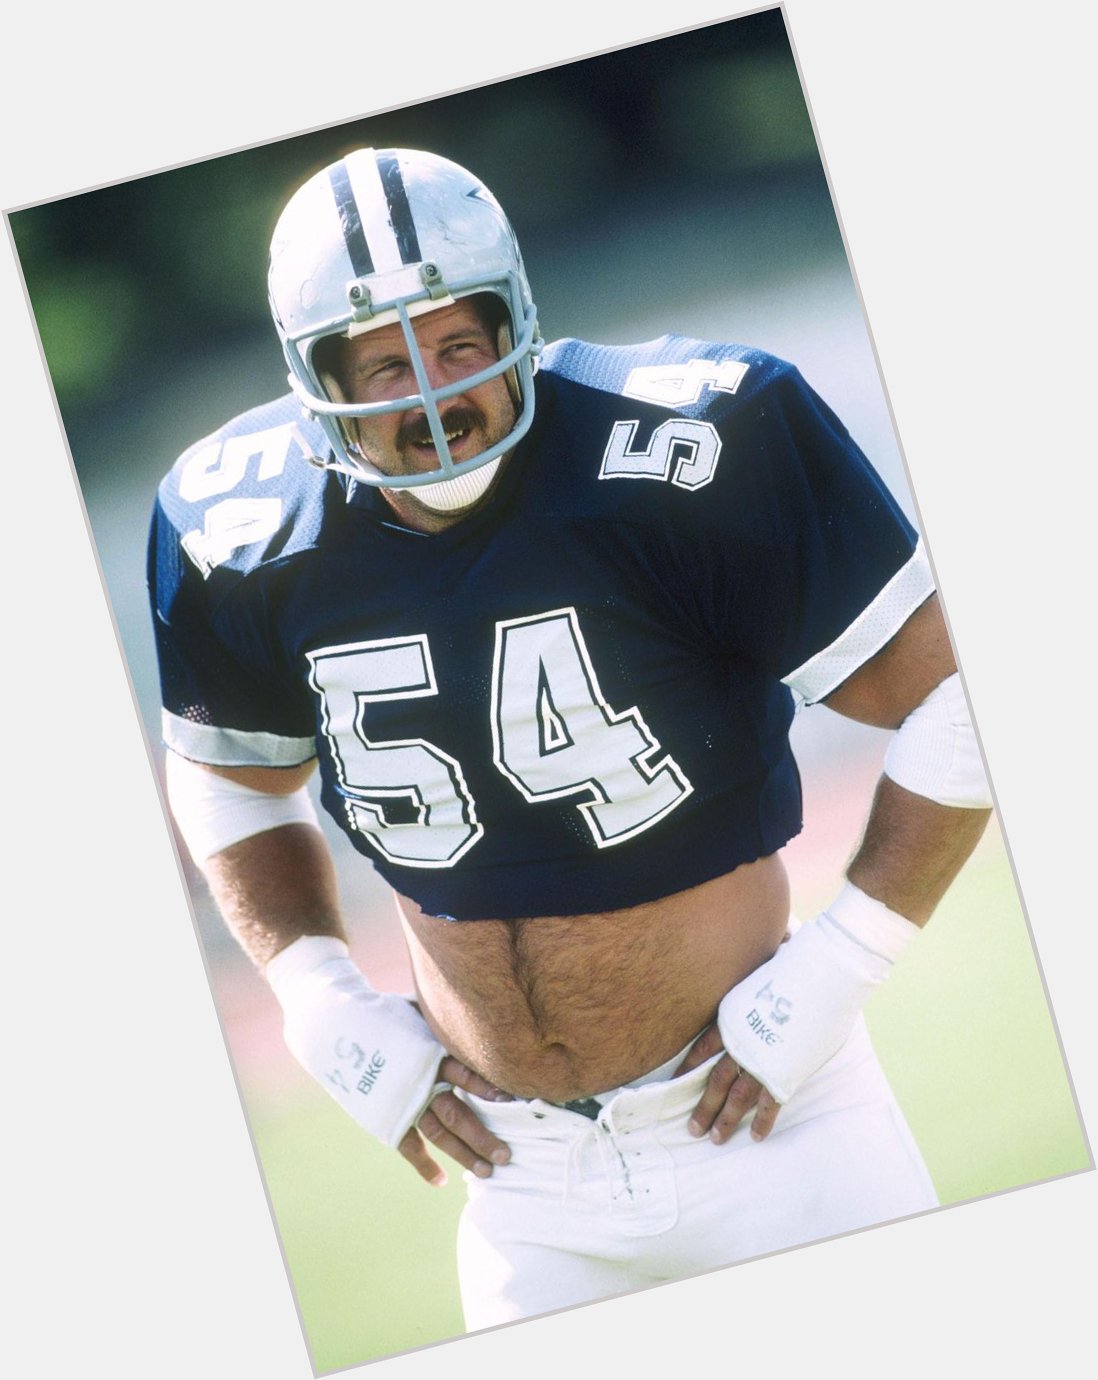 Happy BDay to lifetime member and Hall of Famer Randy White! 